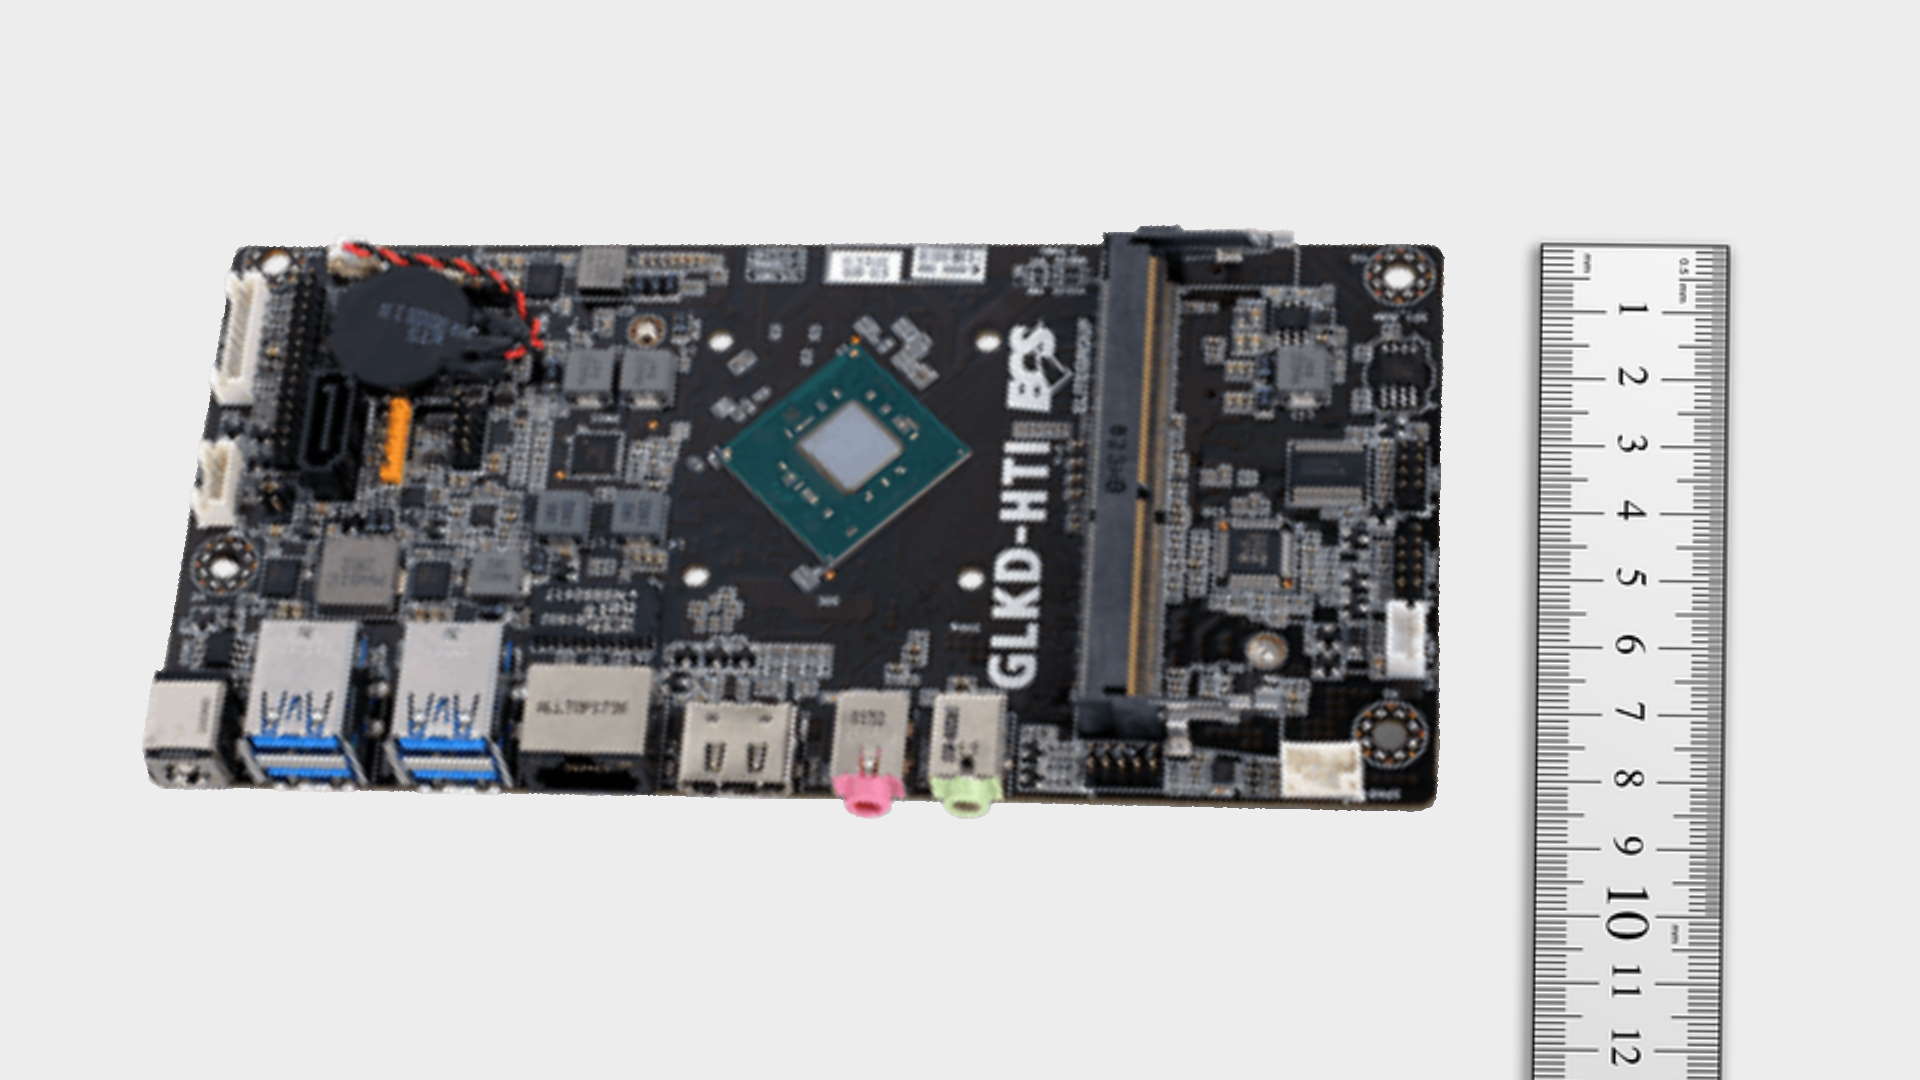  This new Intel motherboard is so adorably tiny, I can't even 